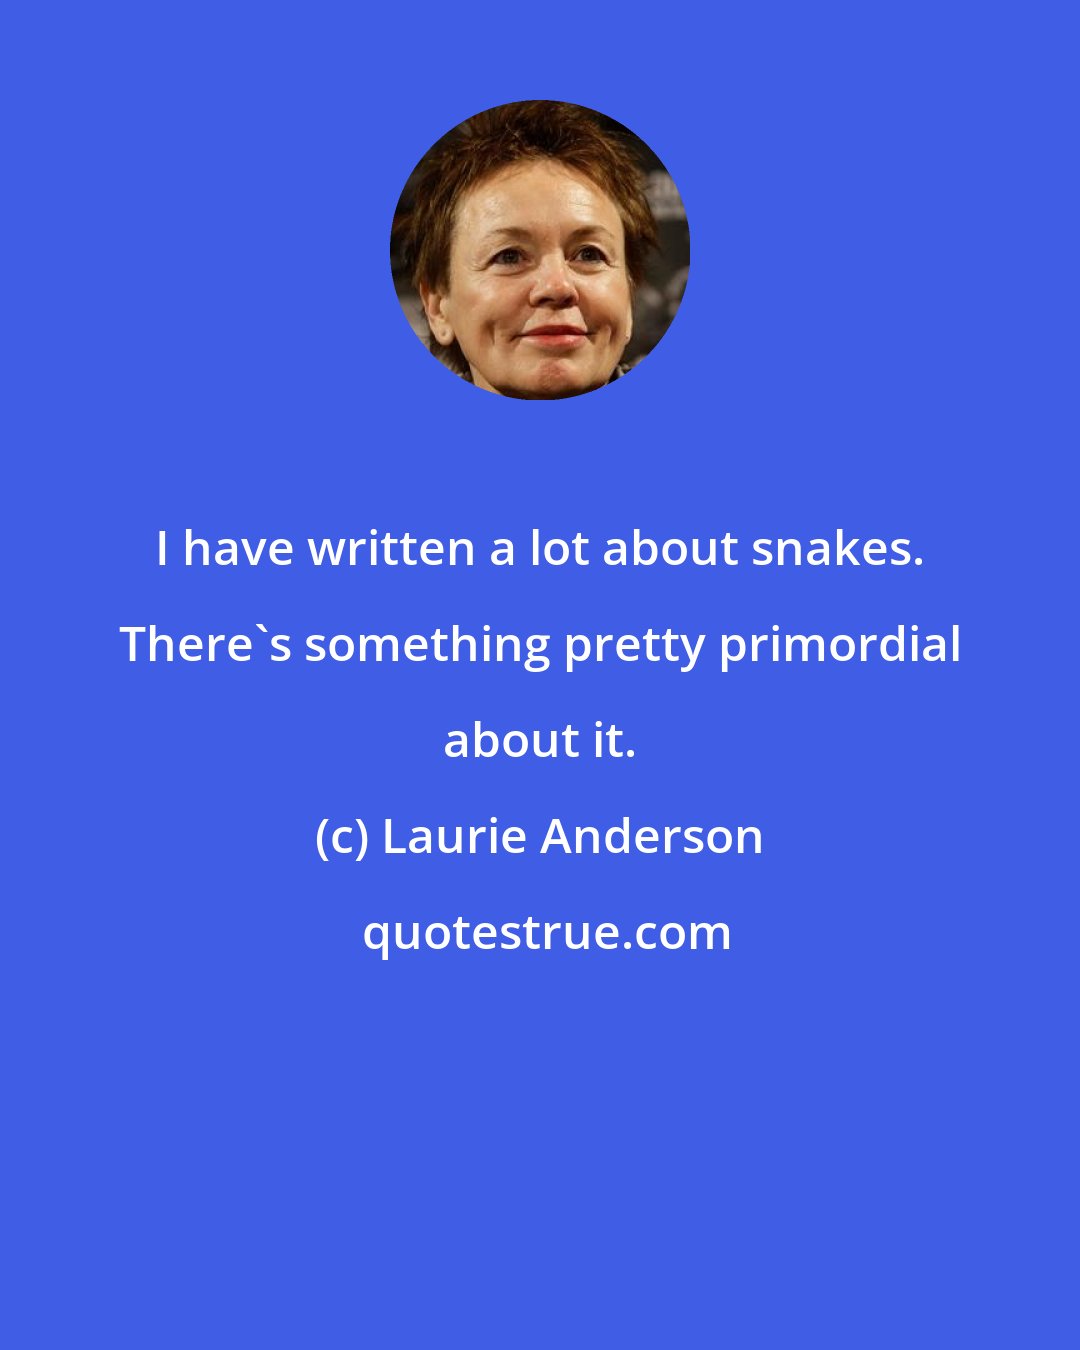 Laurie Anderson: I have written a lot about snakes. There's something pretty primordial about it.